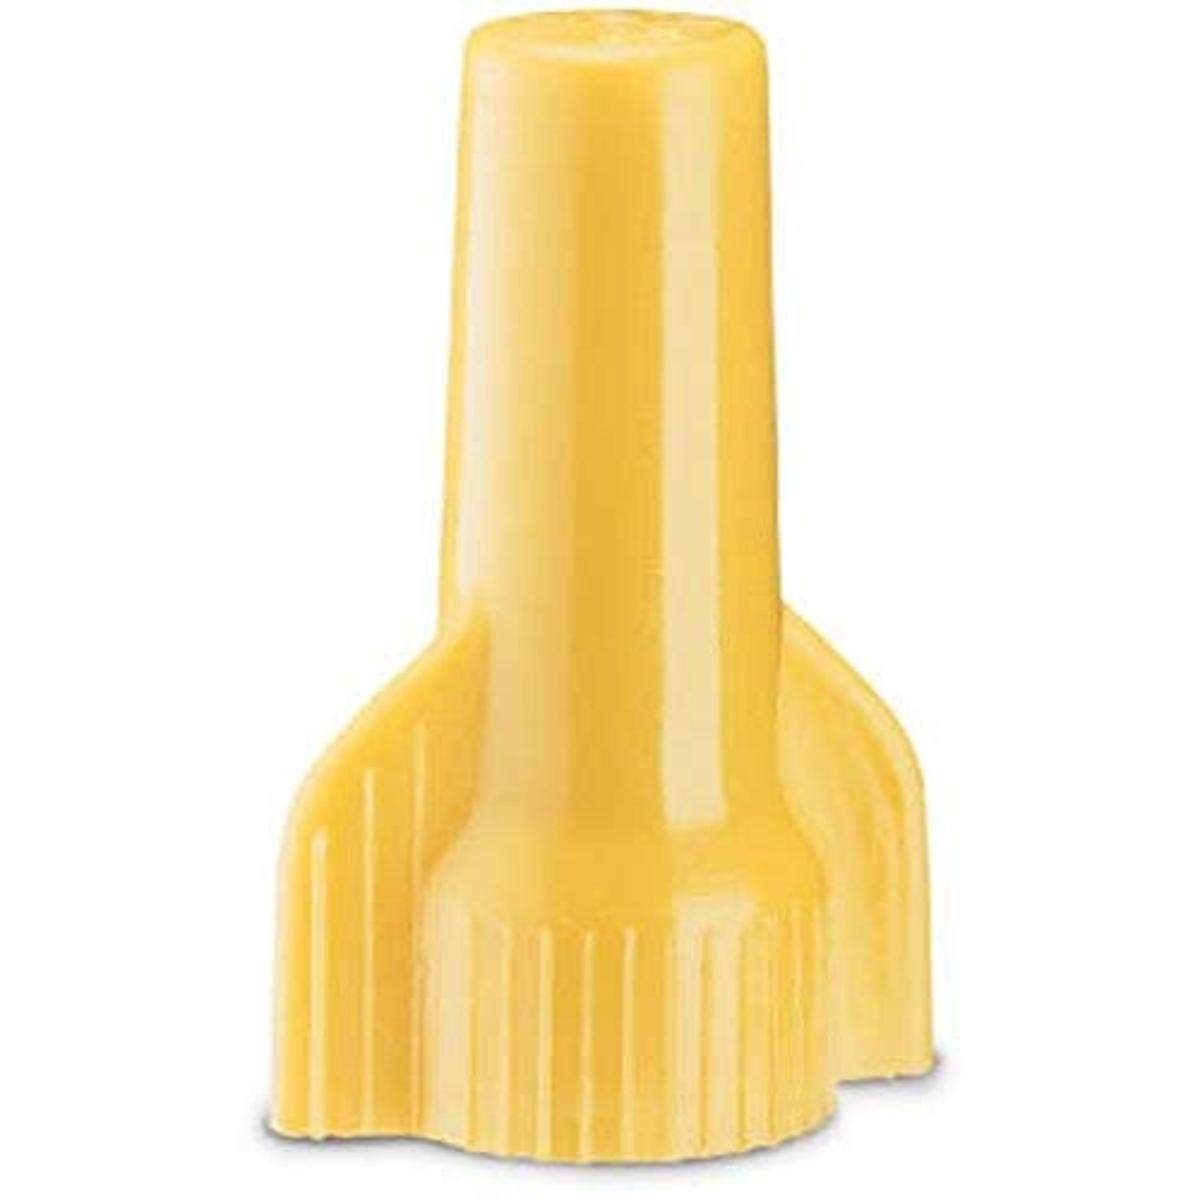 gardner Bender 16-084 Winggard Twist-On Wire connectors, 22-10 AWg, Electrical , Yellow, 100 count (Pack of 1)